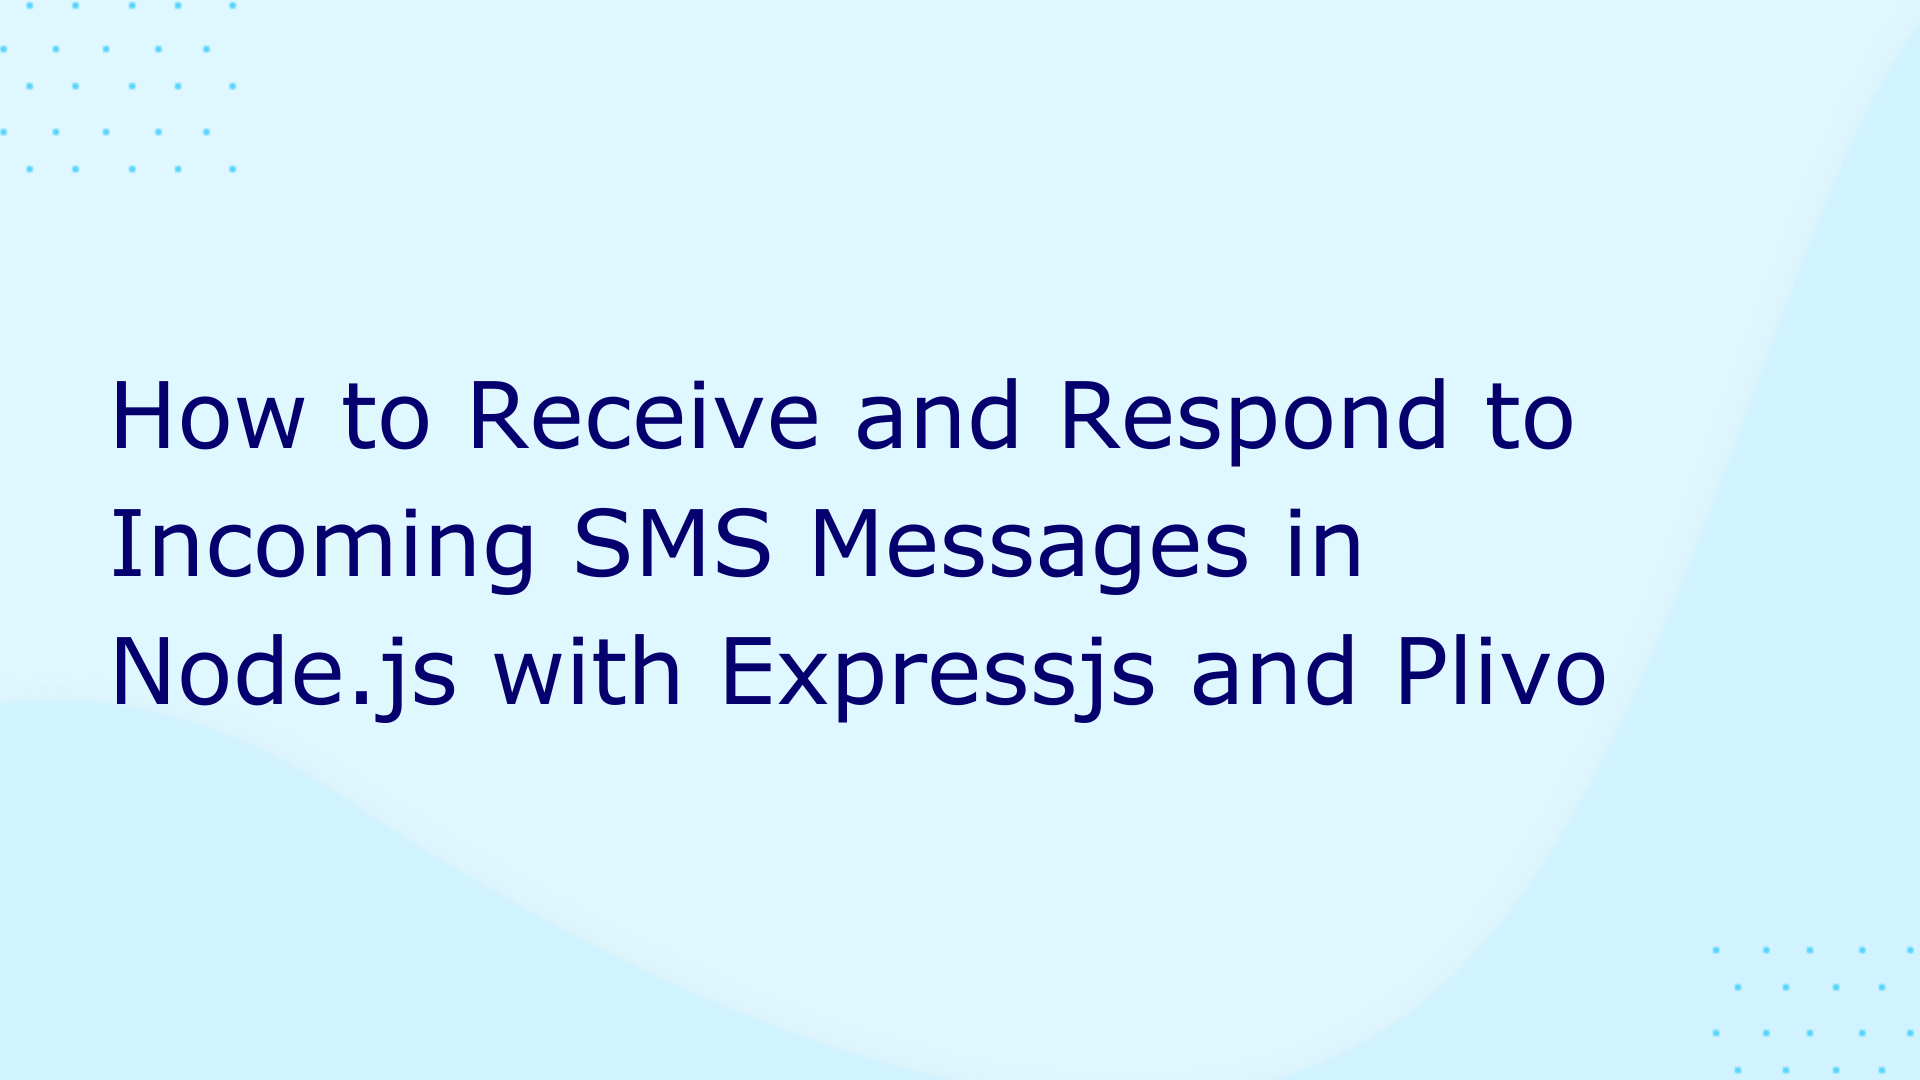 How to Receive and Respond to Incoming SMS Messages in Node.js with ExpressJS and Plivo